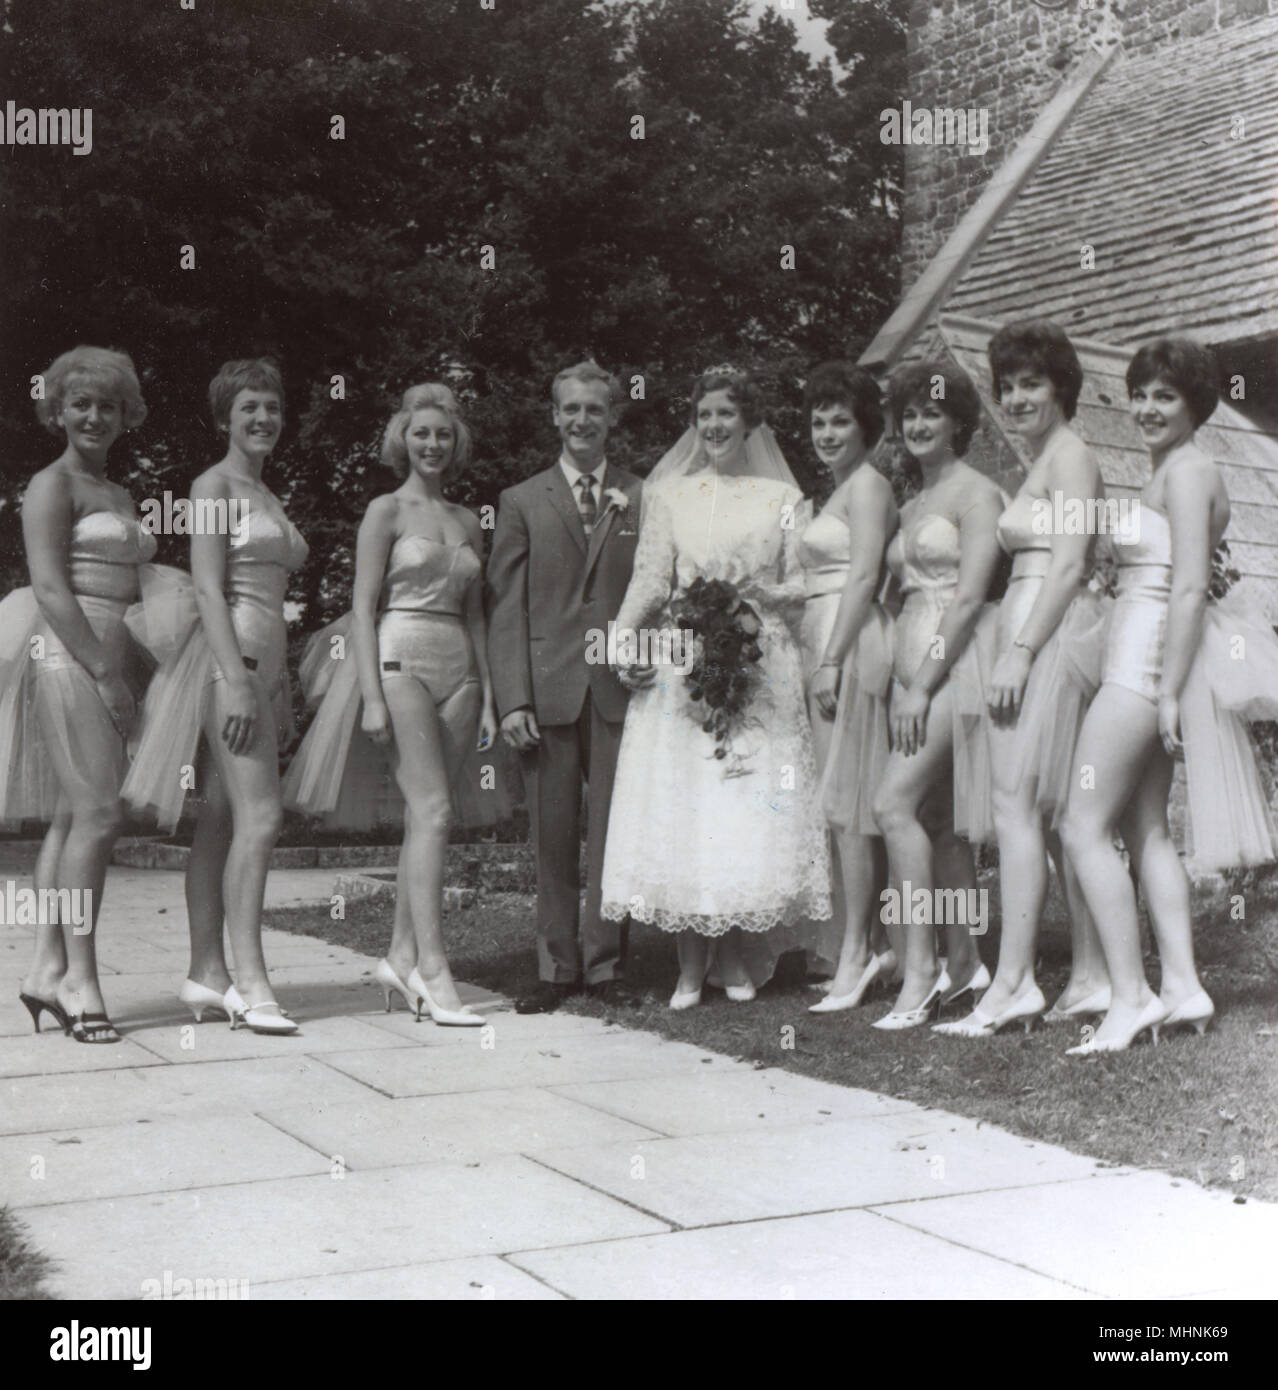 August 1962, Kinson, Bournemouth. The wedding of Eileen Hart, 22 of New Milton and David King of Coombe Gardens, Bournemouth caused quite a stir (and claims of a publicity stunt) in the local press (and rather a lot of 'tutting' it seems) when seven of Hart's teammates from the Bournemouth Aqua Theatre's 'Big Splash' summer show posed for the wedding photographs outside the church in their swimsuits. The General Manager of the Pier Approach Baths apologised to the Vicar of St. Andrew's Church (the Rev. Alfred Loughlin) on behalf of the Baths Committee. The whole incident was closed amicably - Stock Photo